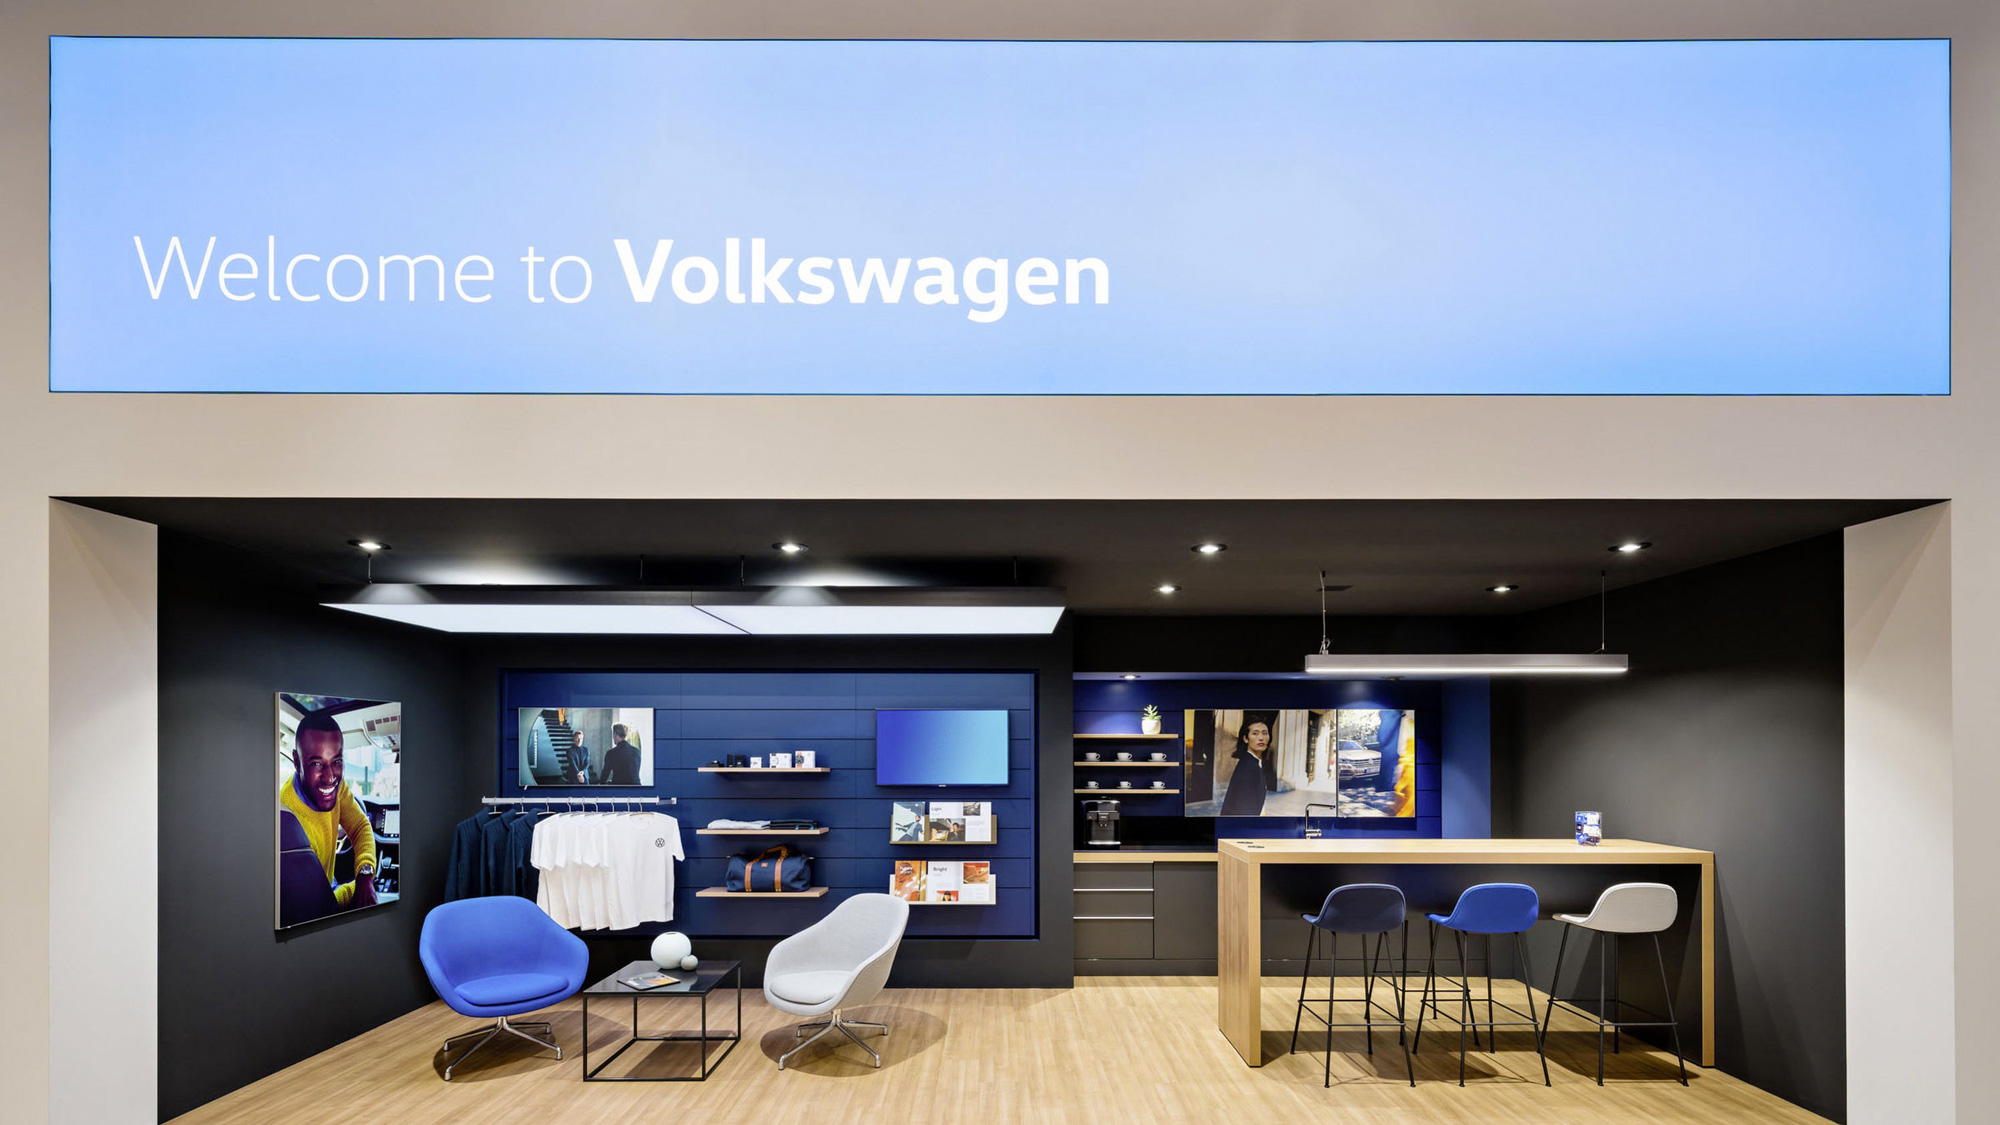 New Logo and Identity for Volkswagen done In-house